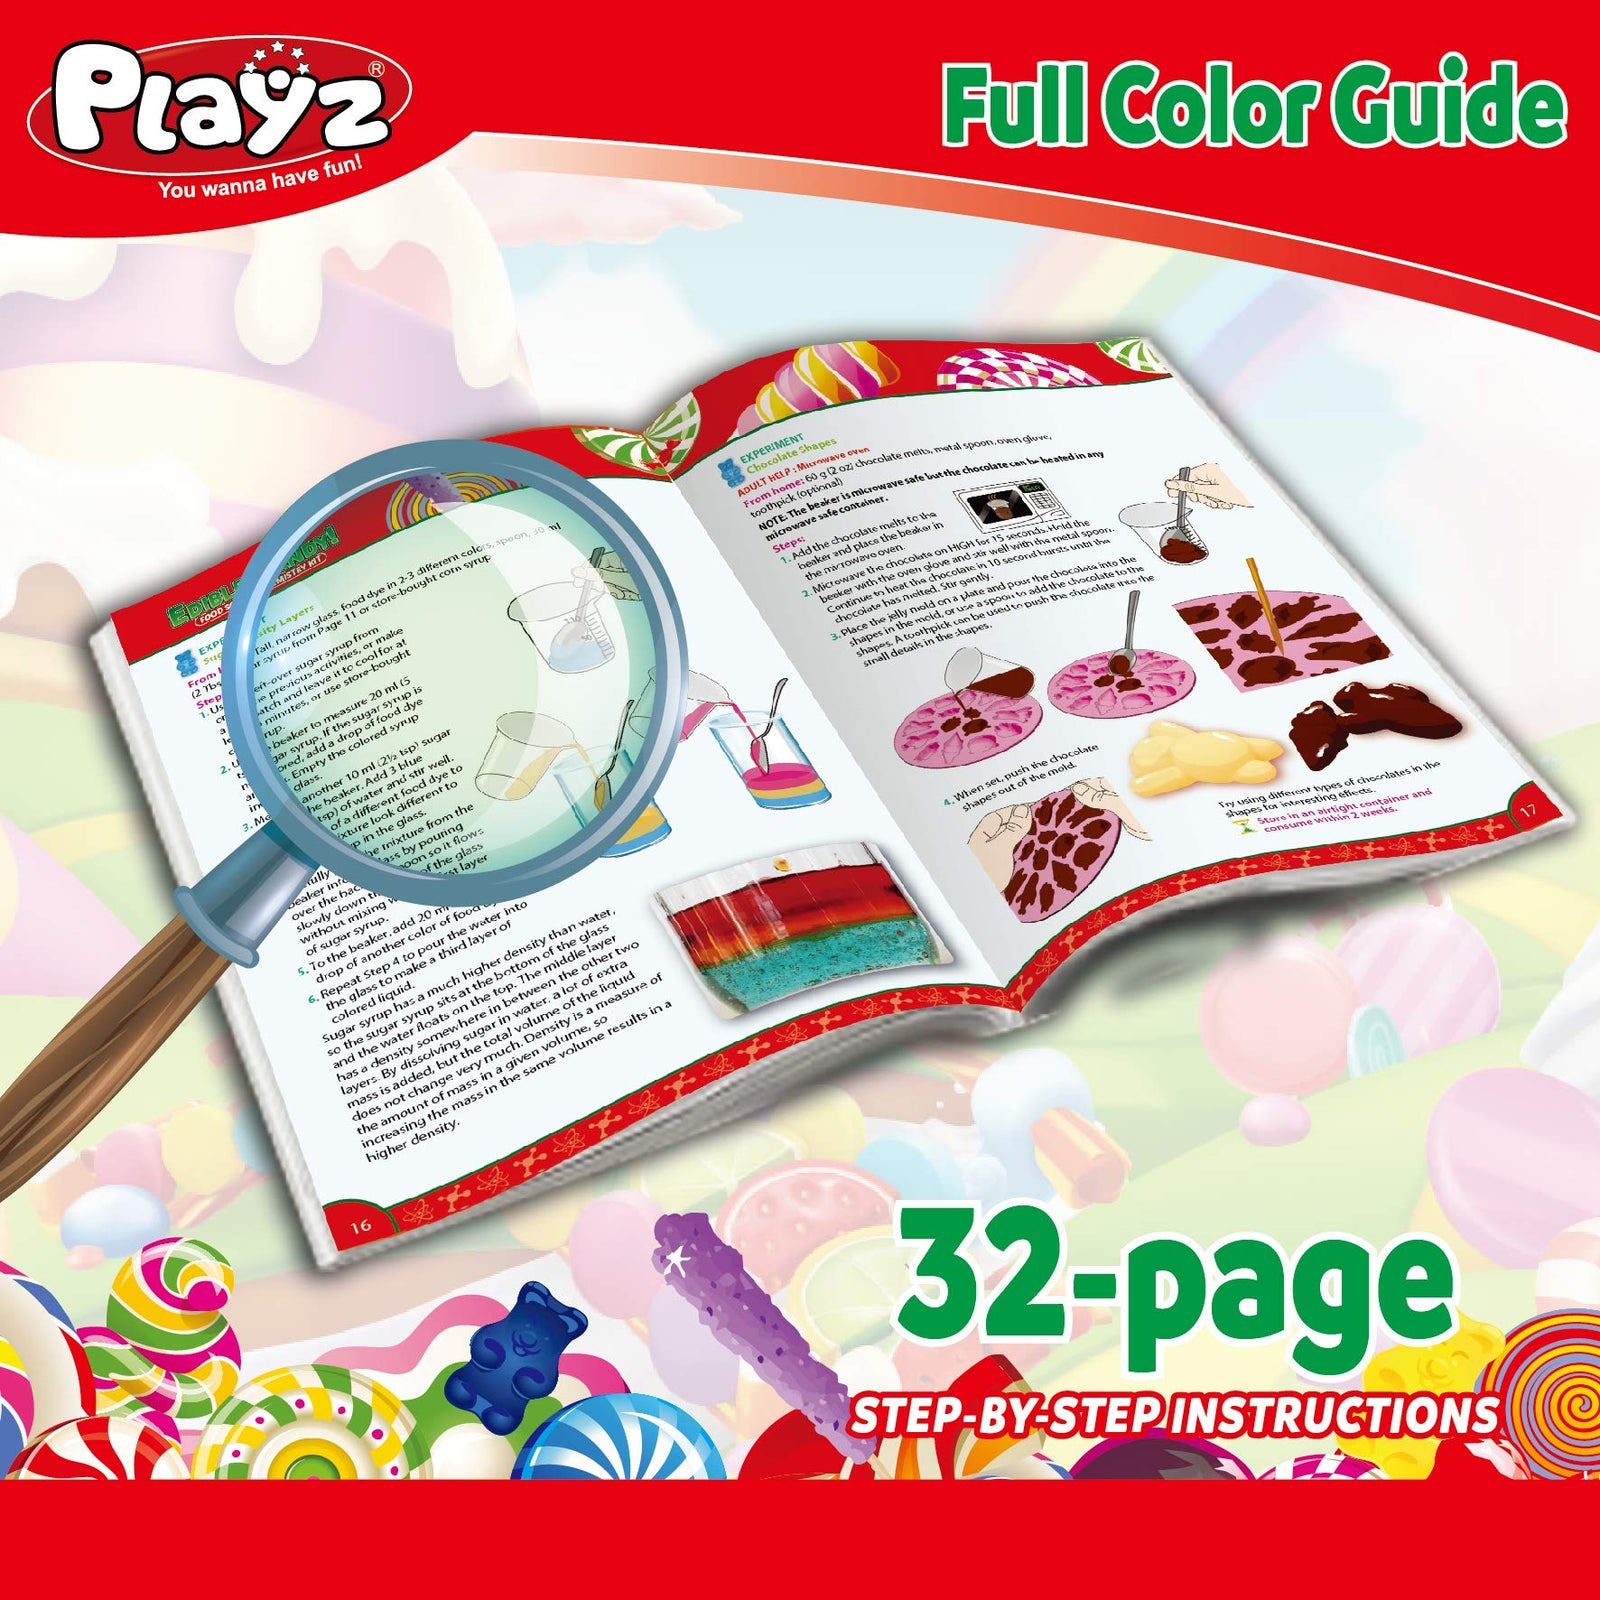 Playz Edible Candy! Food Science STEM Chemistry Kit - 40+ DIY Make Your Own Chocolates and Candy Experiments for Boy, Girls, Teenagers, & Kids Ages 8, 9, 10, 11, 12, 13+ Years Old